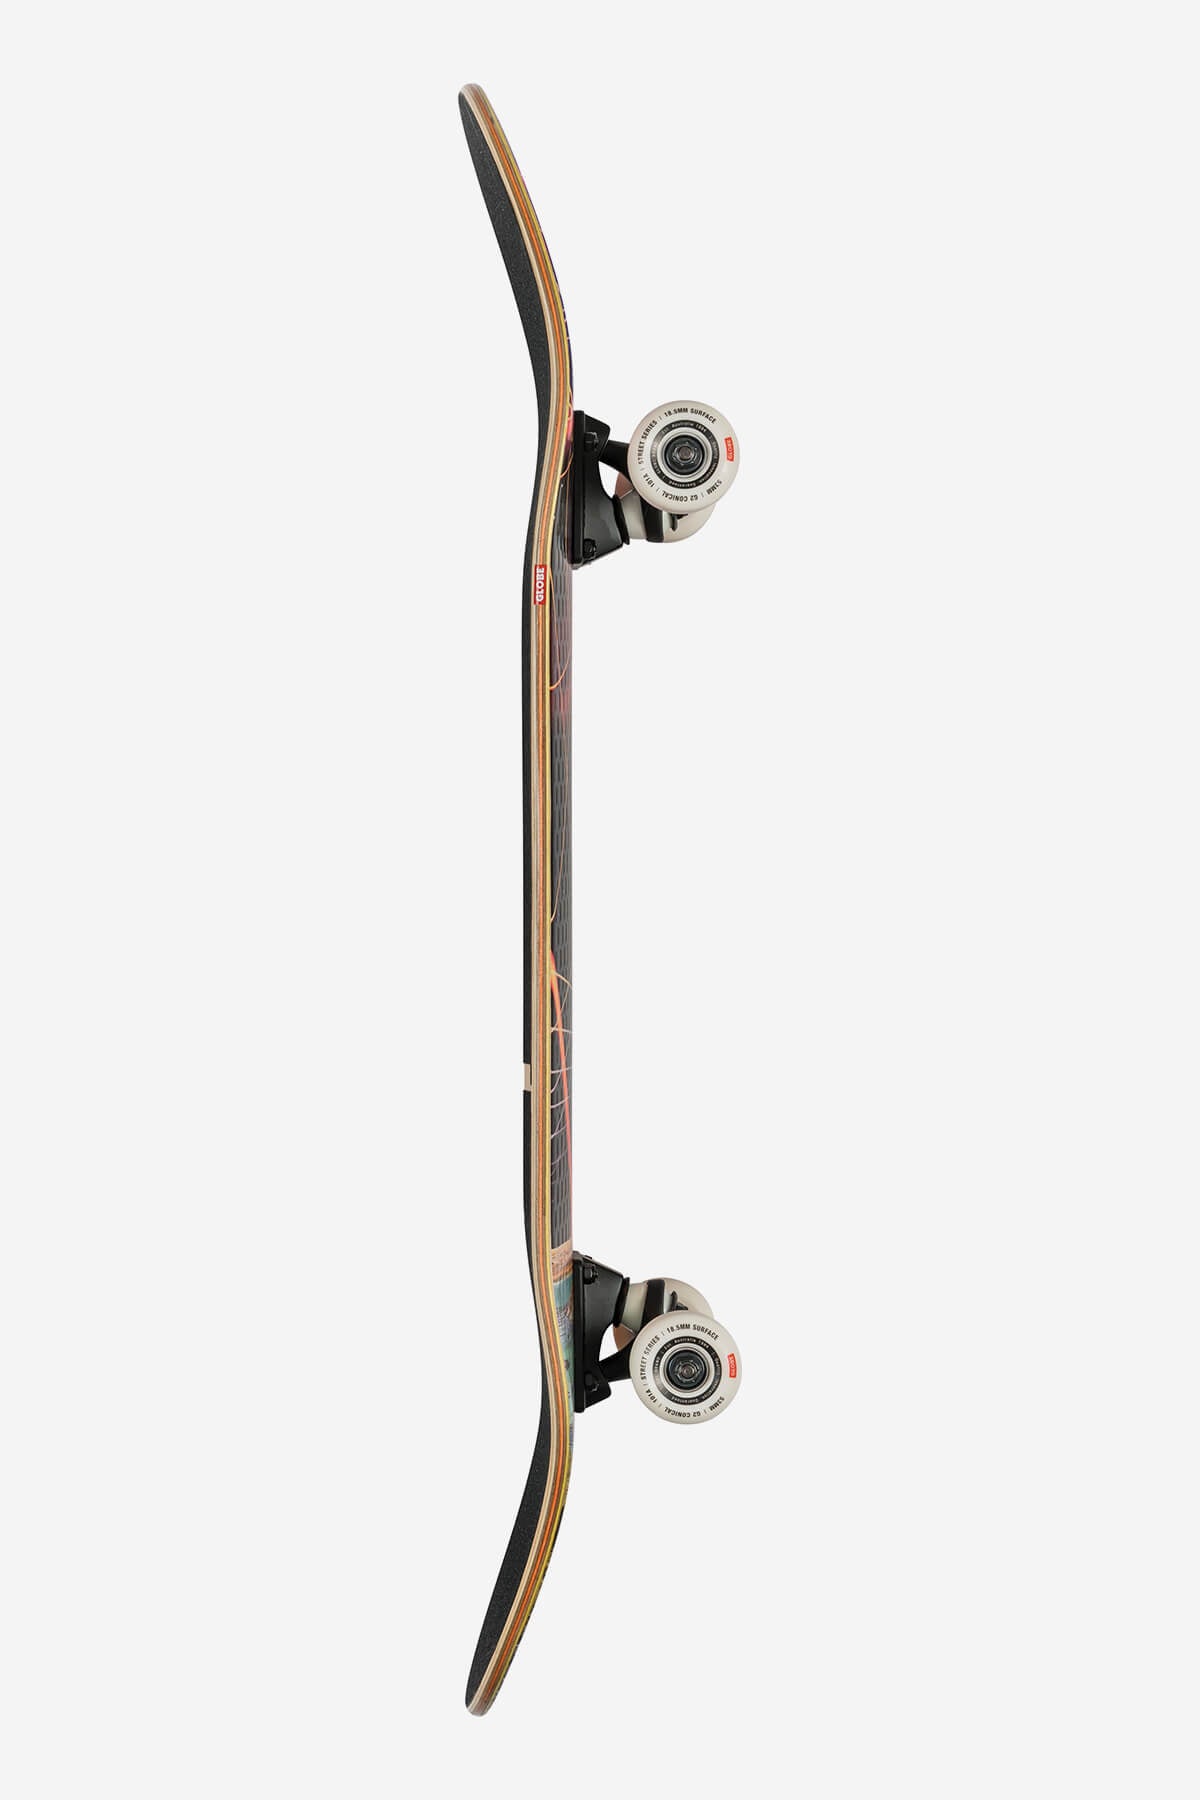 Globe - G2 Rapid Space - Asteroid - 8.25" Skate completo